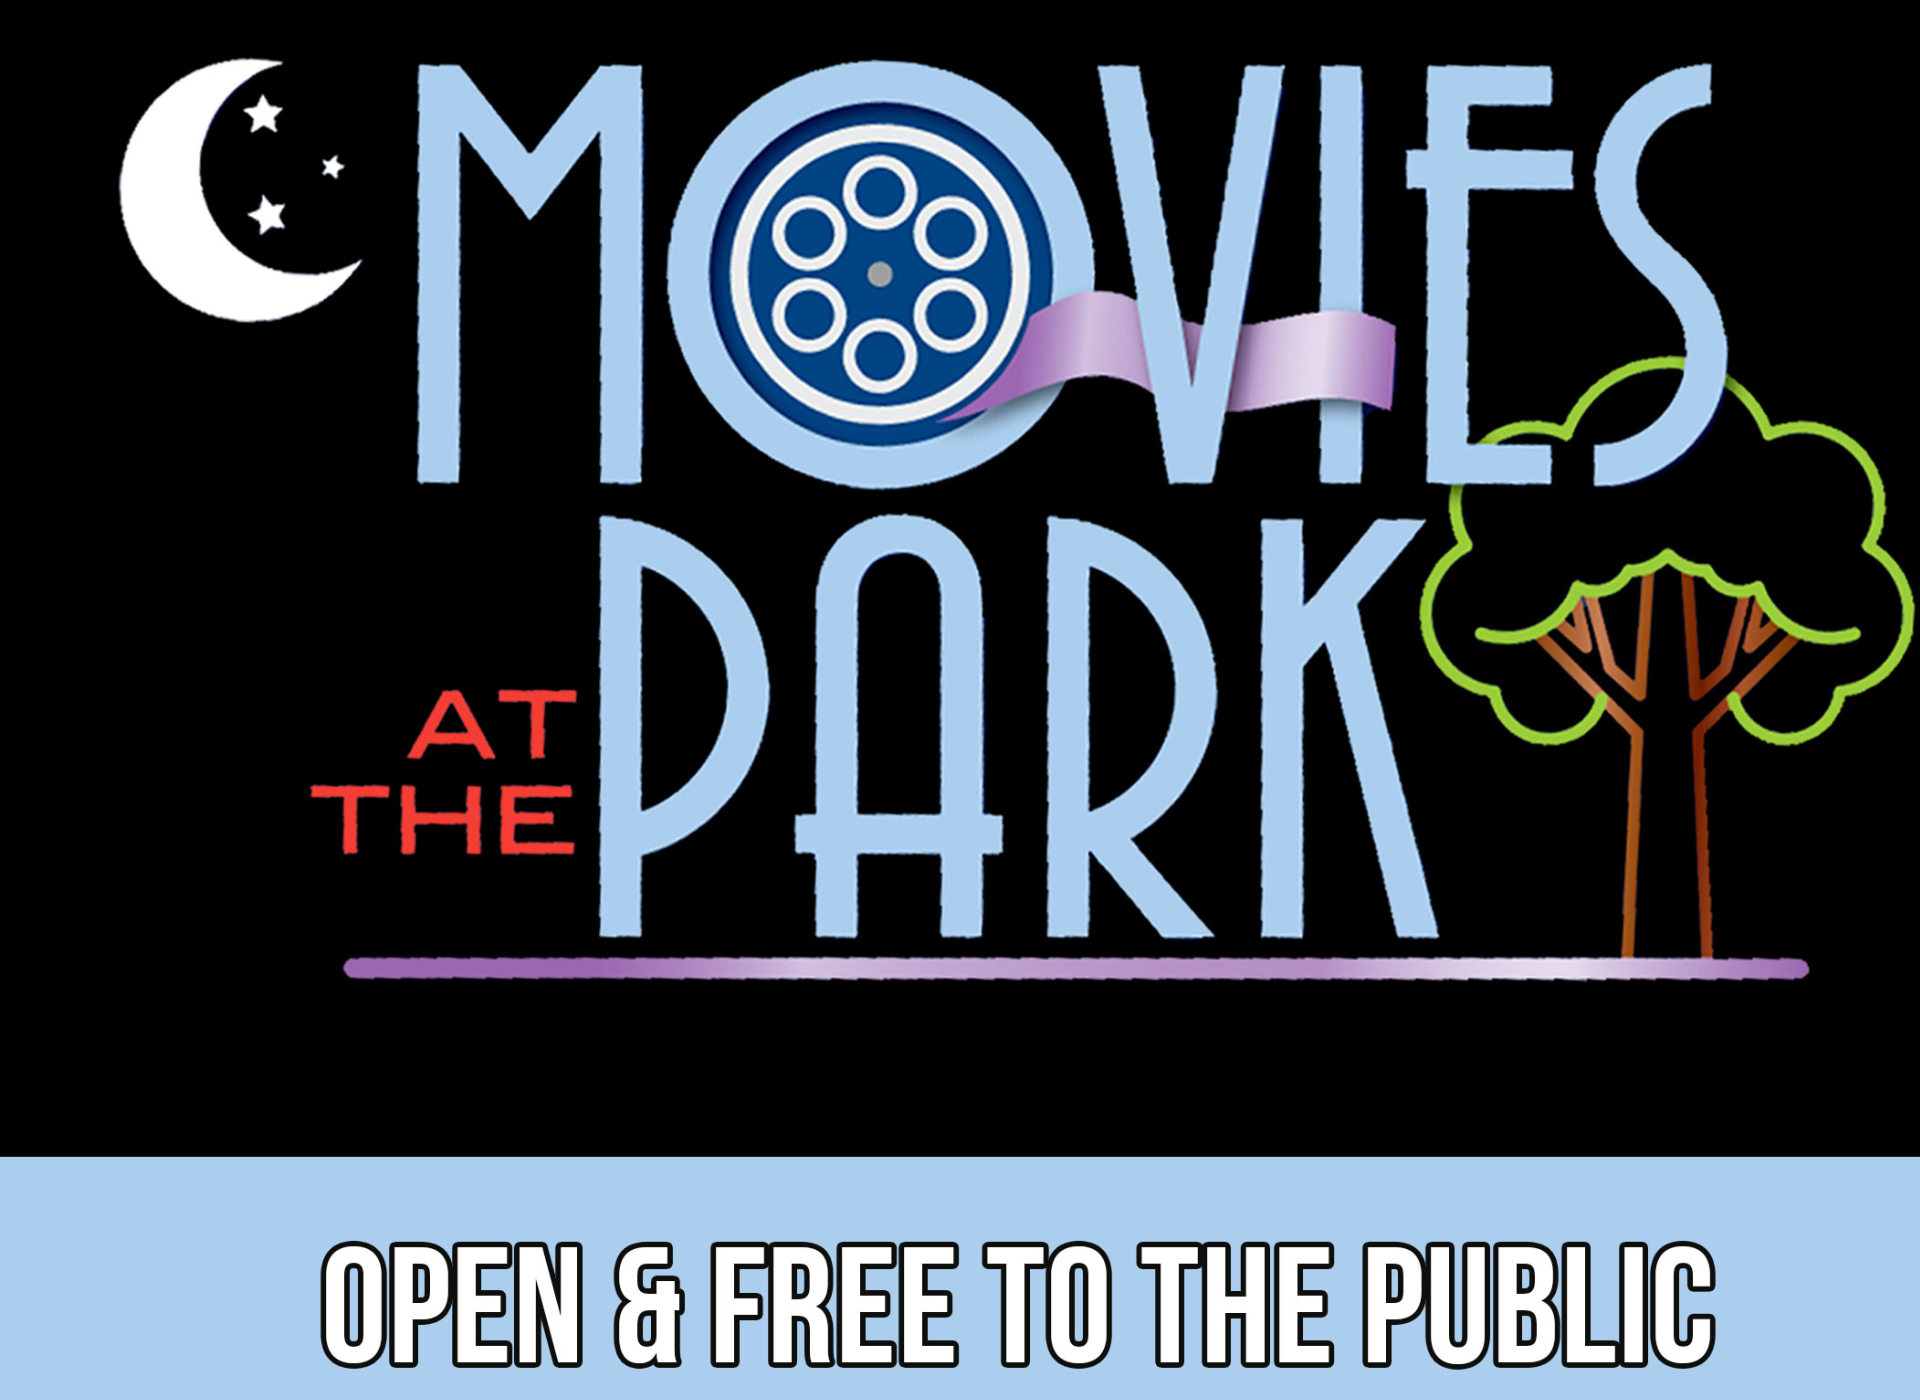 City of Doral - Movies At The Park 2